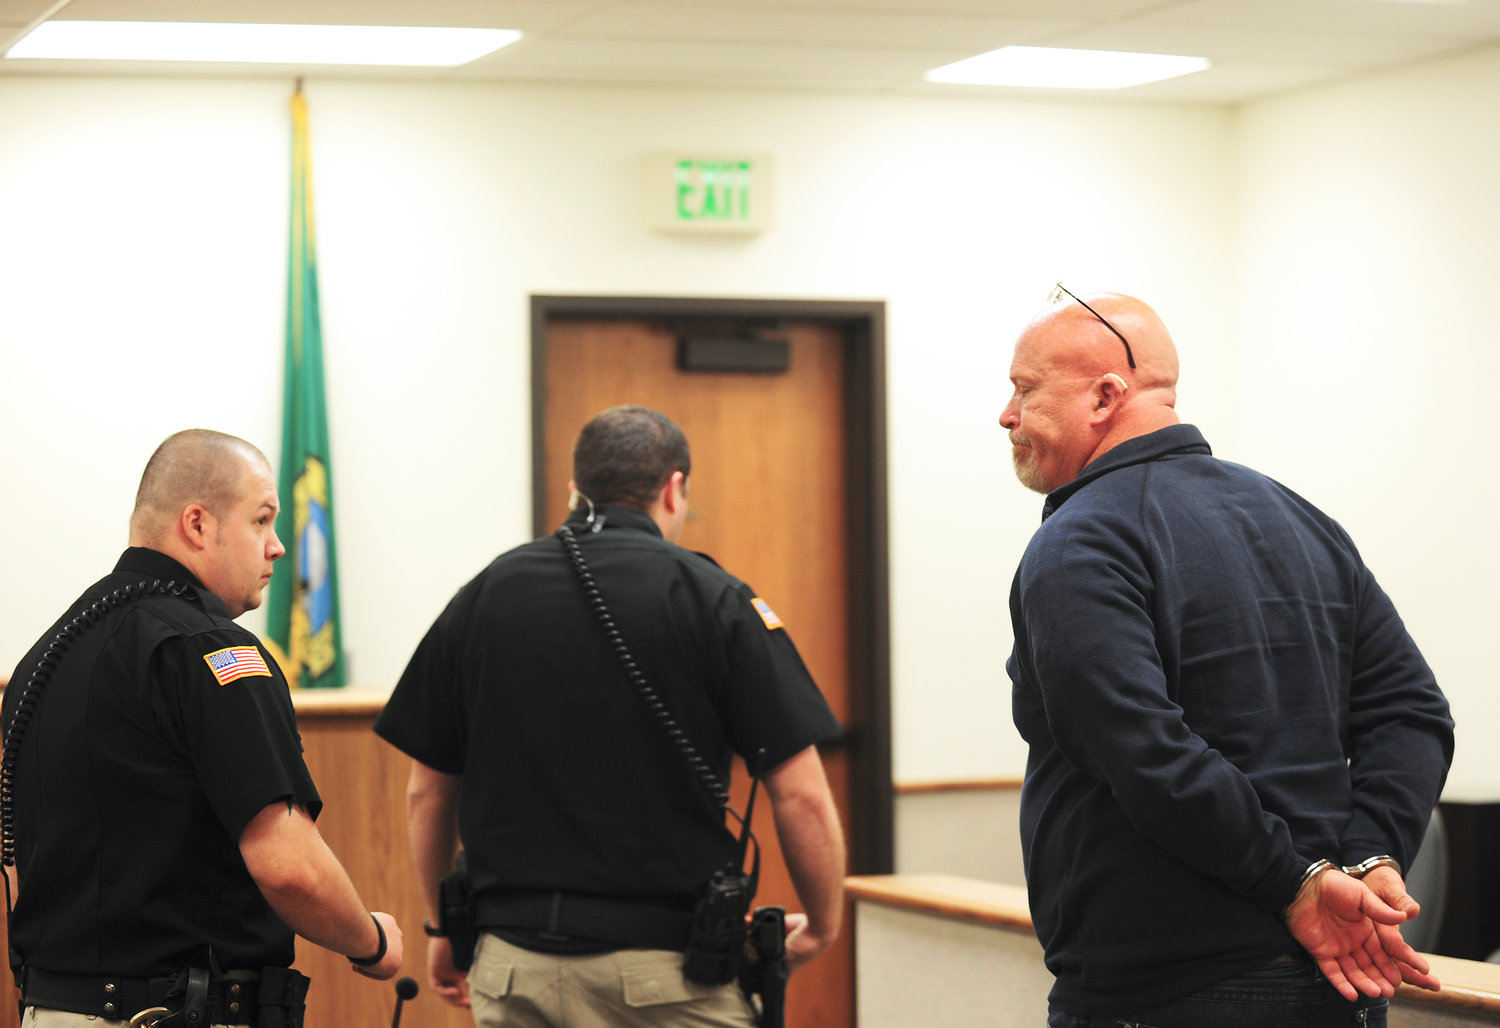 After being handcuffed, Kenneth Sands, of Rainier, walks out of the courtroom after being sentenced to five months in jail on Tuesday in Superior Court at the Lewis County Law and Justice Center in Chehalis.